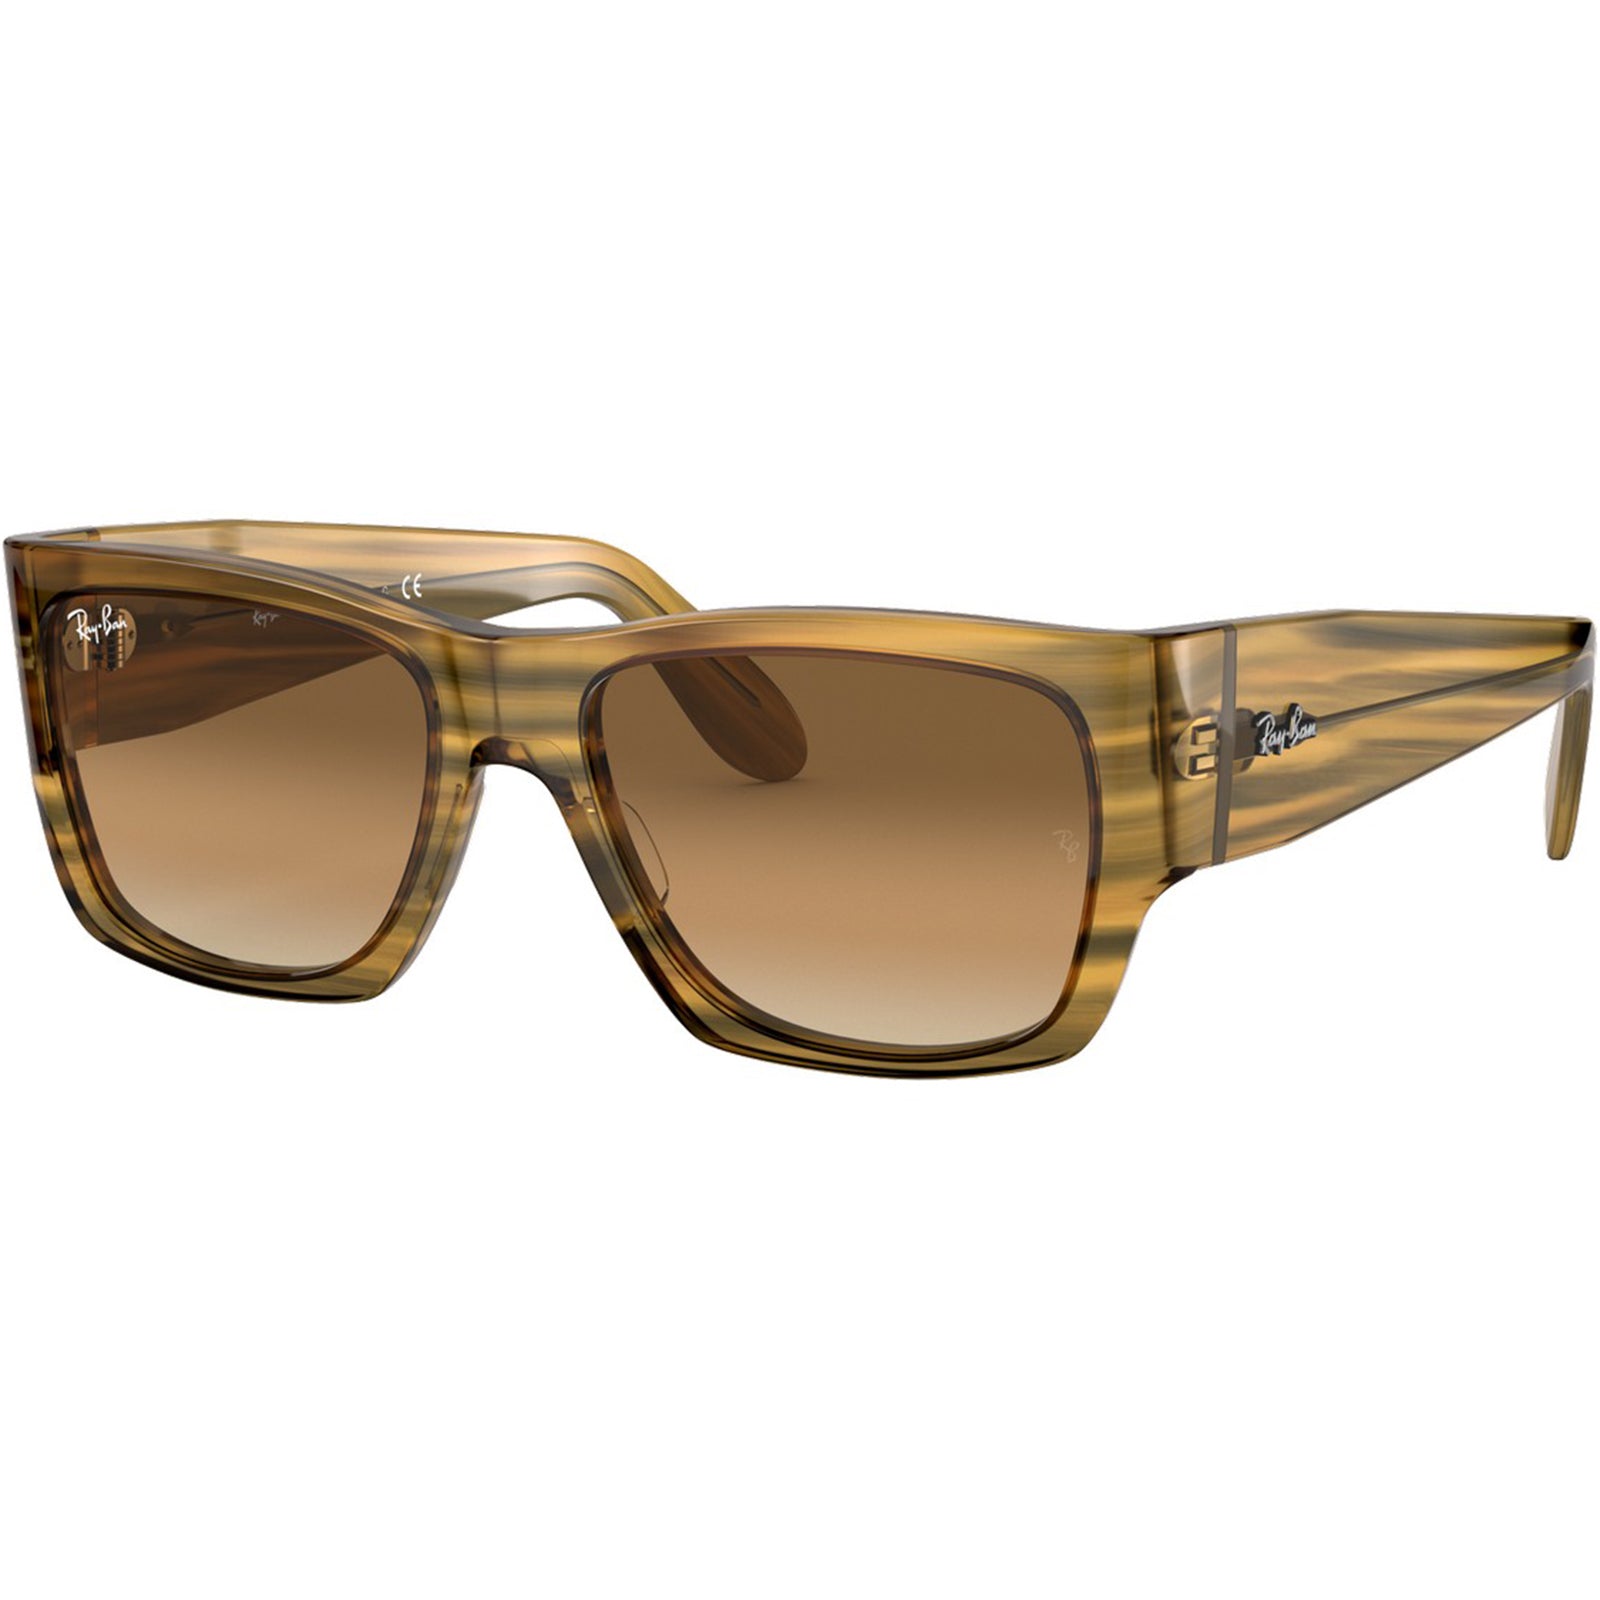 Ray-Ban Nomad Adult Lifestyle Sunglasses-0RB2187